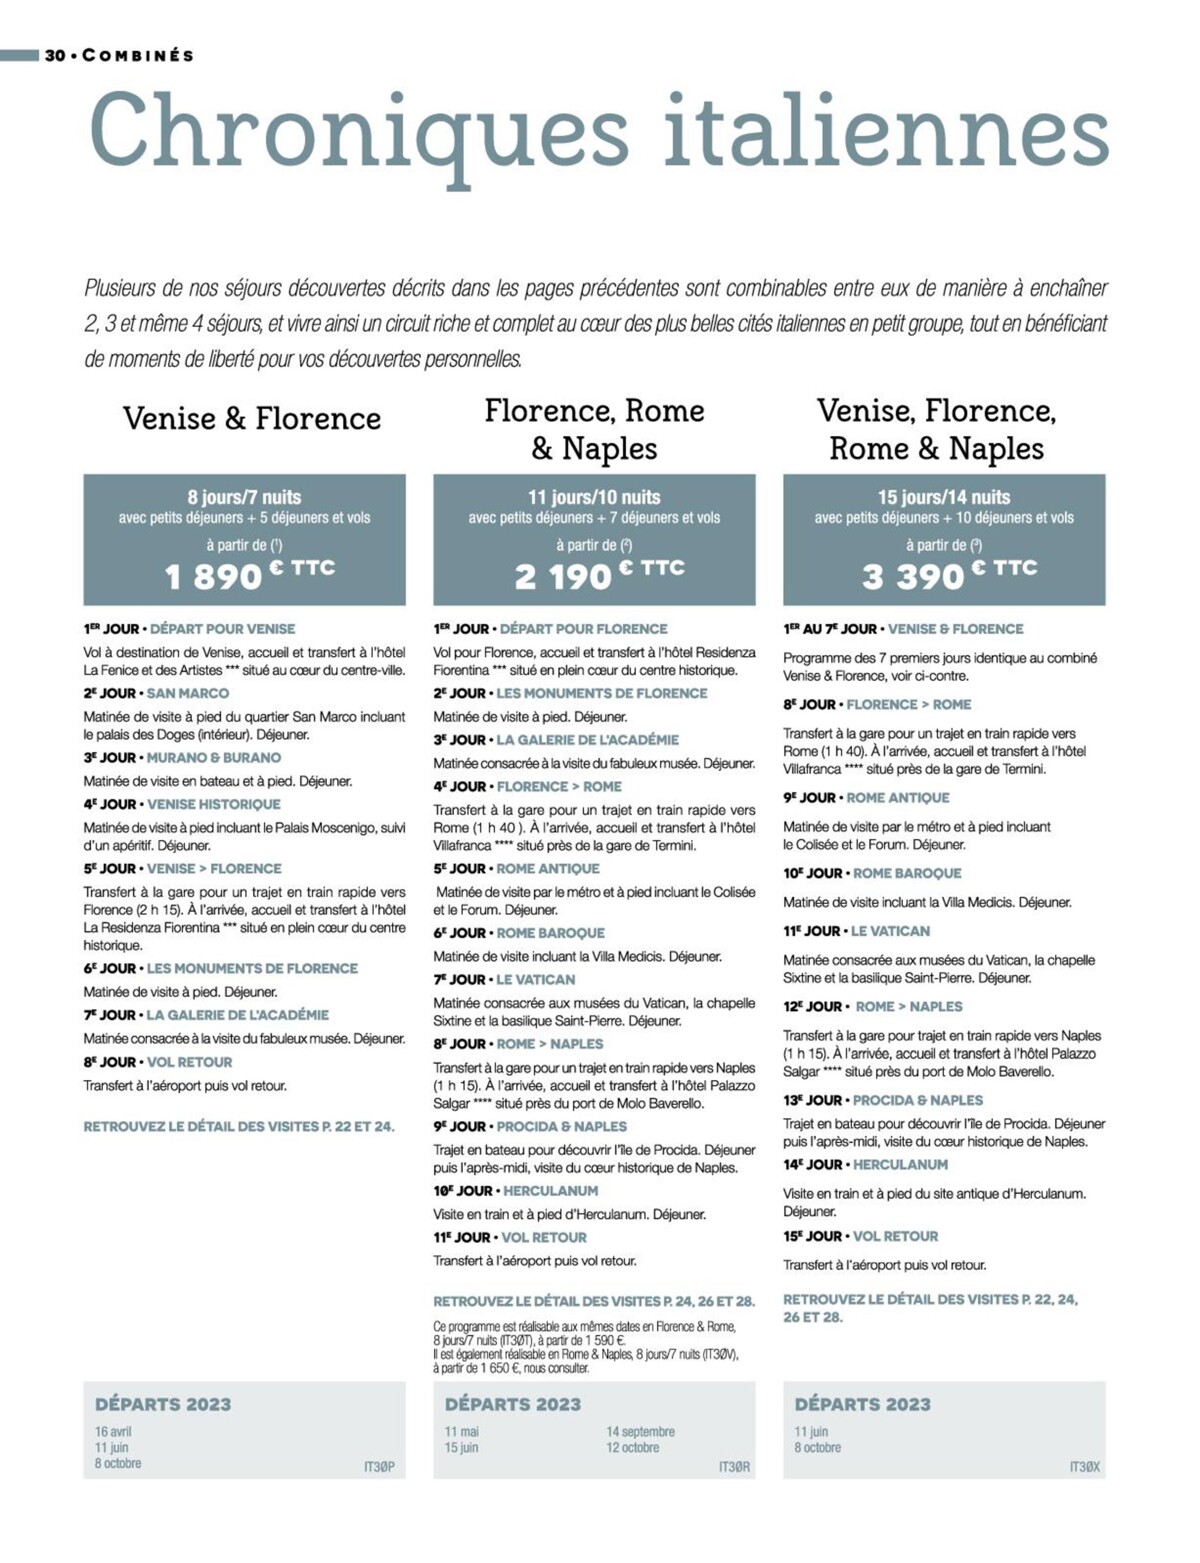 Catalogue Italie 2023, page 00032